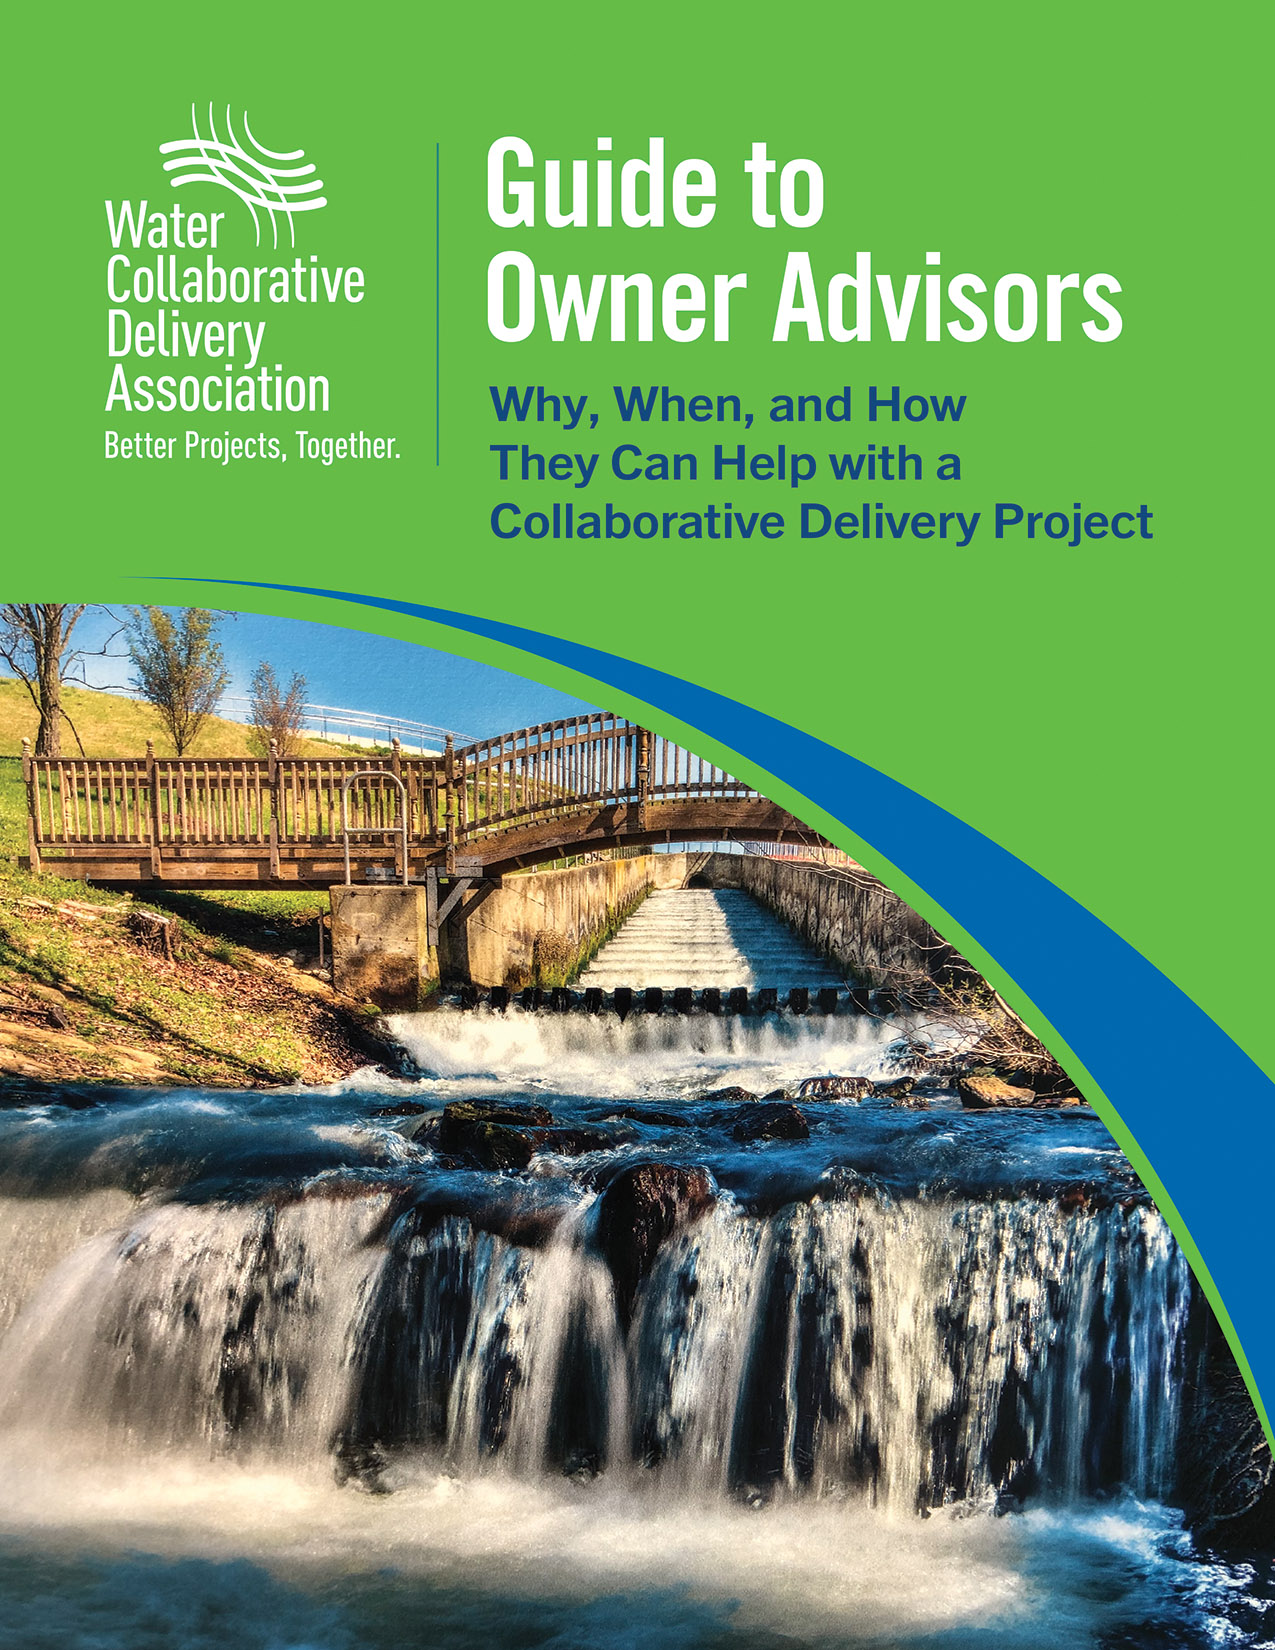 GUIDE TO OWNER ADVISORS COVER